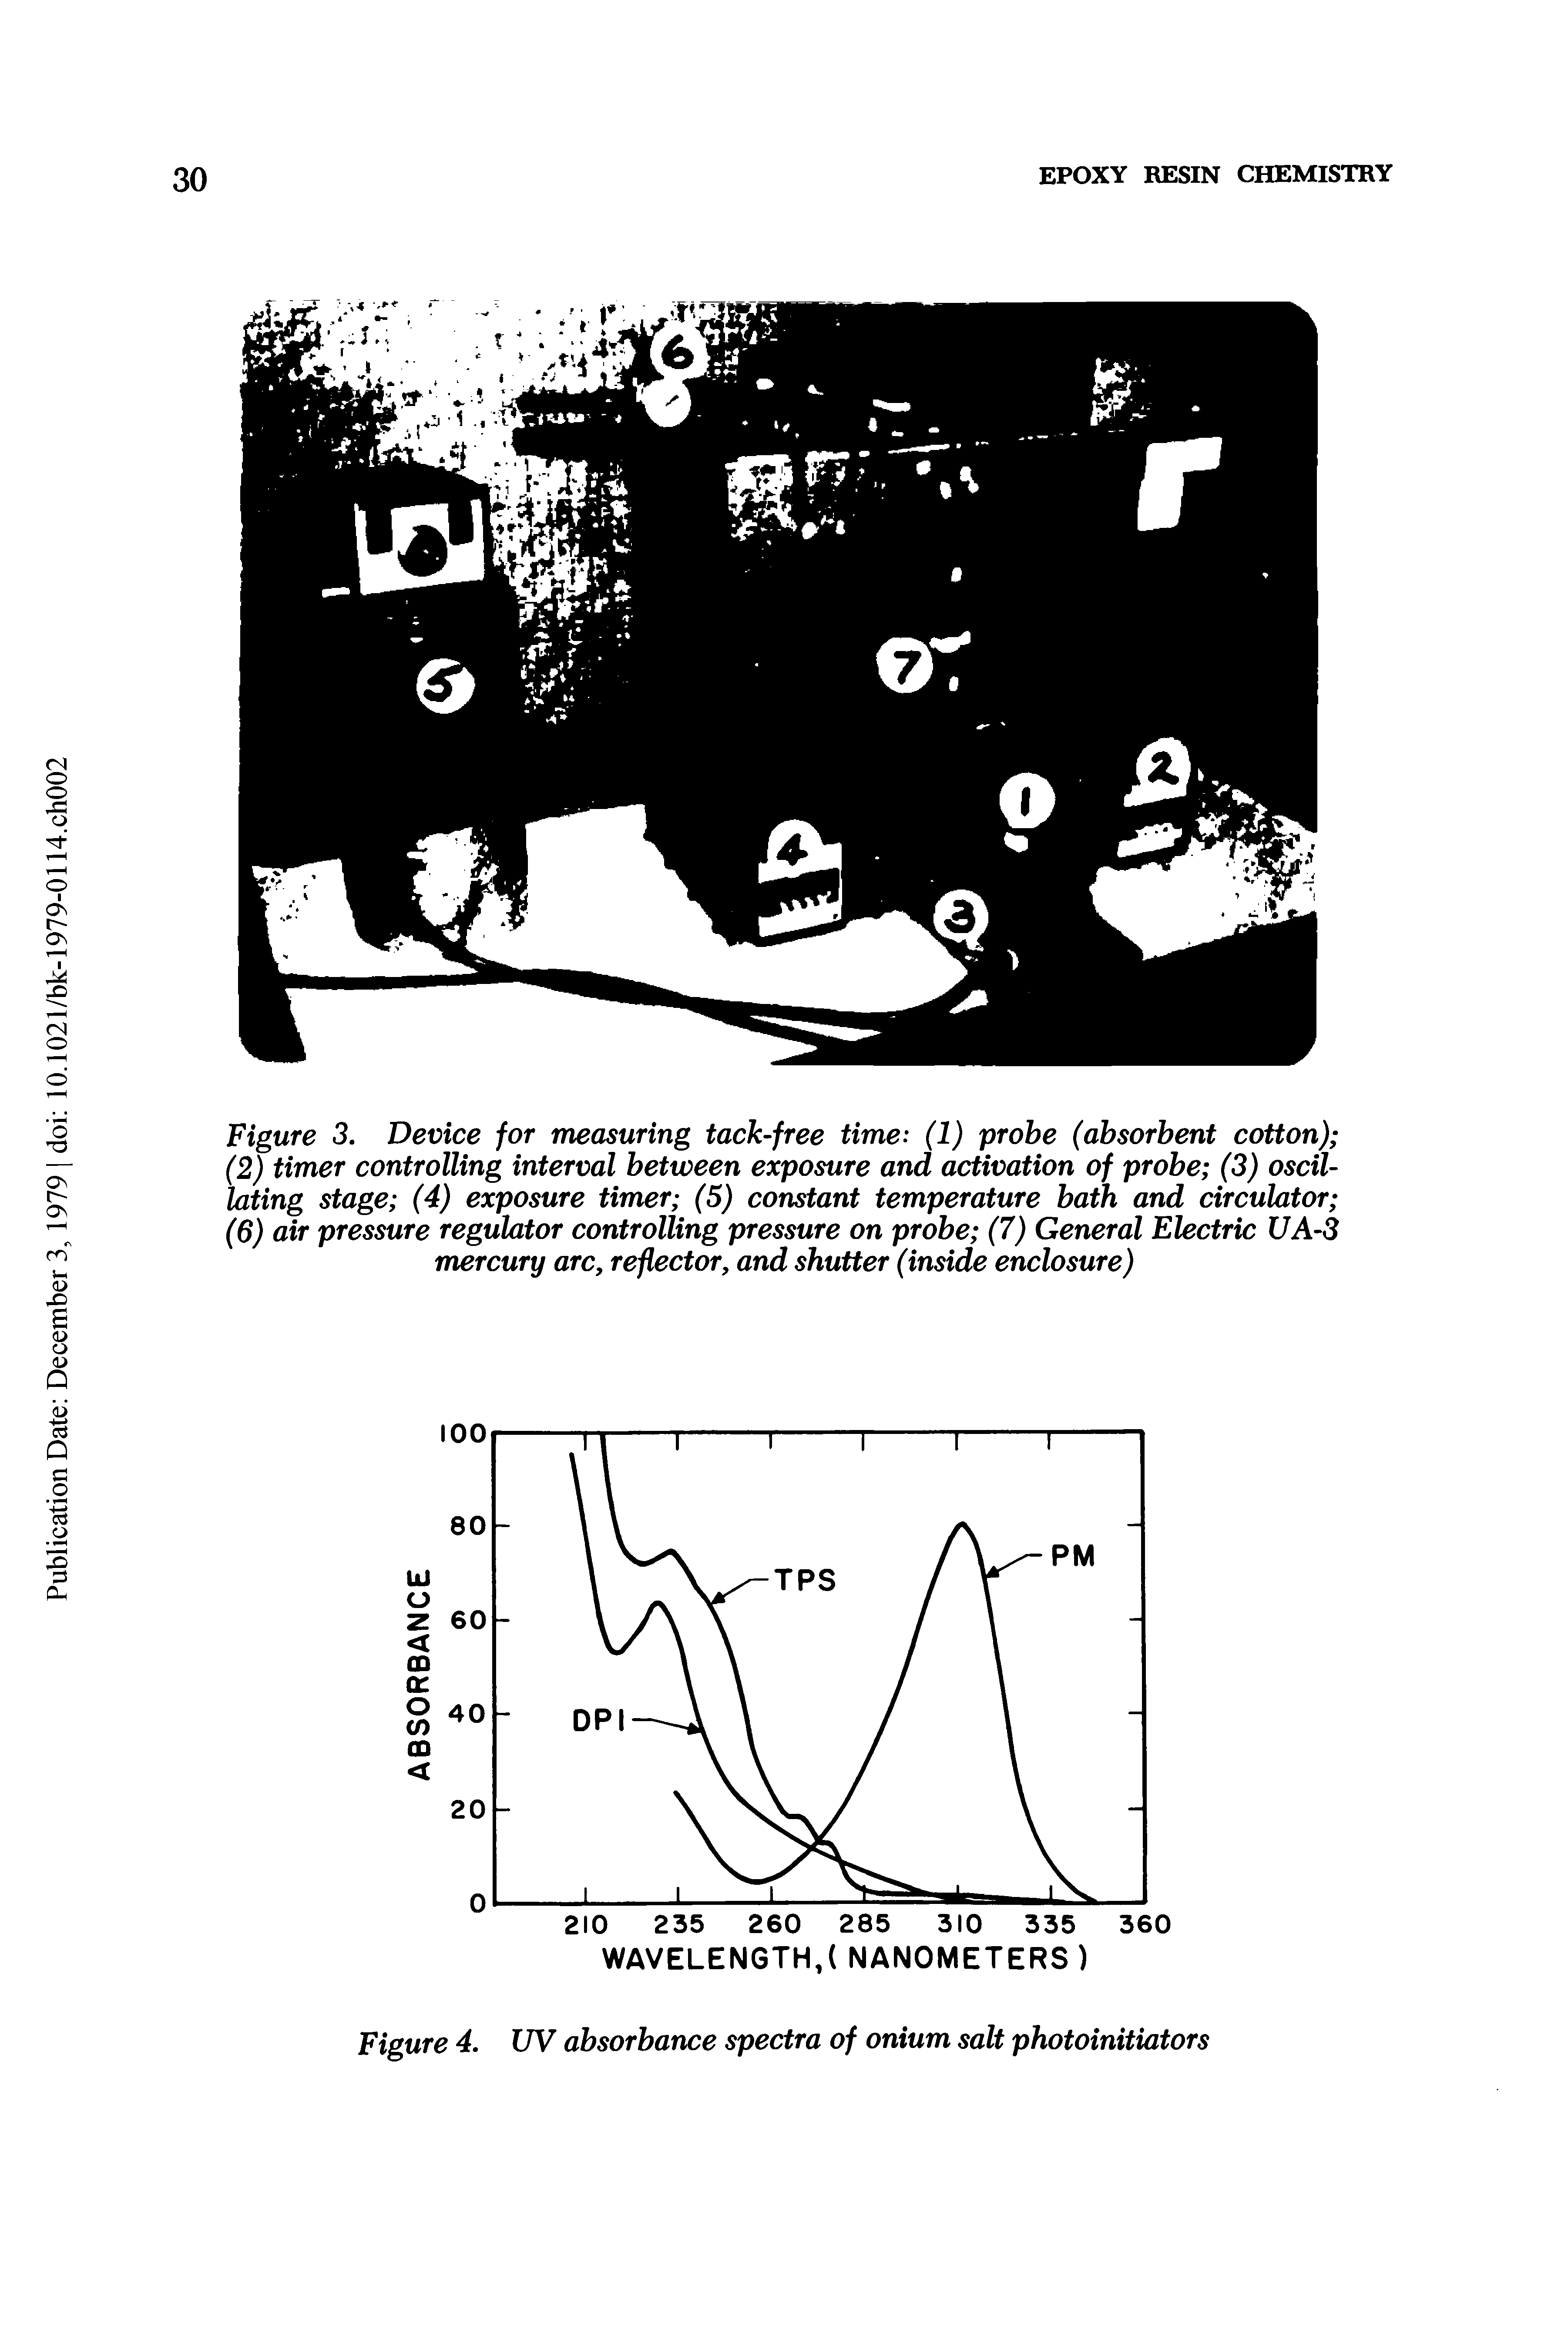 Figure 3. Device for measuring tack-free time (1) probe (absorbent cotton) (2) timer controlling interval between exposure and activation of probe (3) oscillating stage (4) exposure timer (5) constant temperature bath and circulator (6) air pressure regulator controlling pressure on probe (7) General Electric UA-3 mercury arc, reflector, and shutter (inside enclosure)...